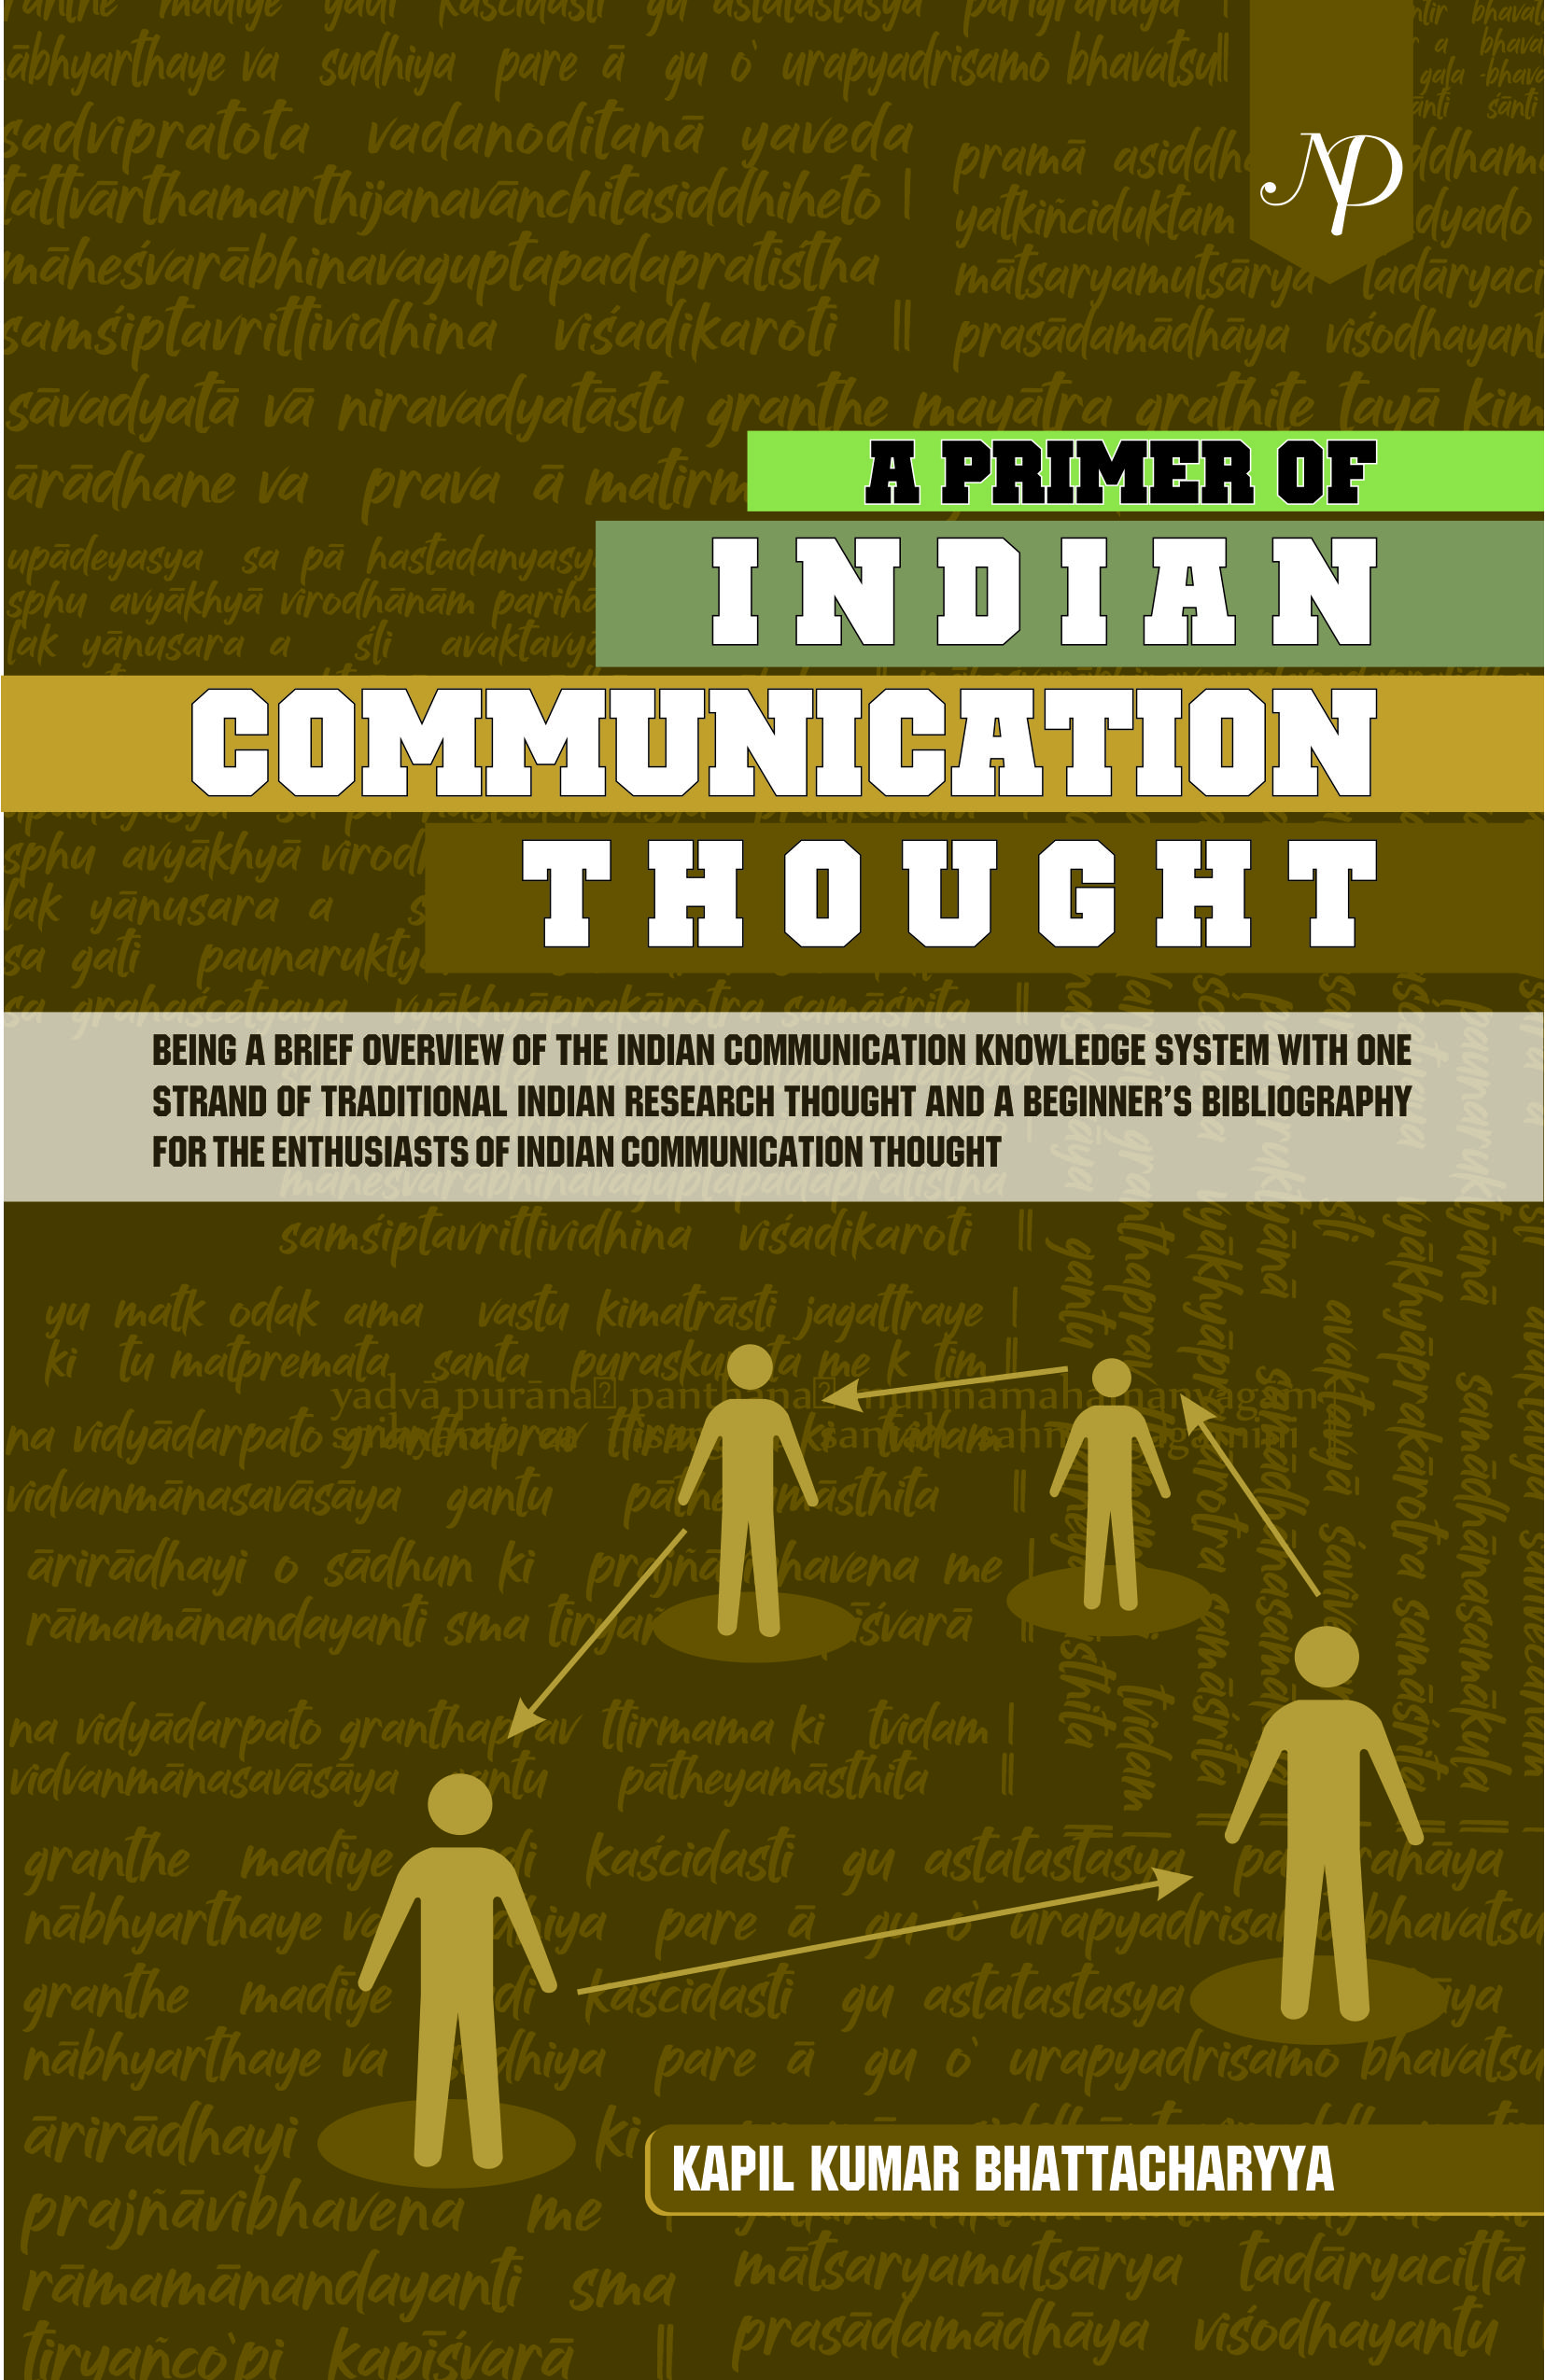 A Primer of Indian Communication thought